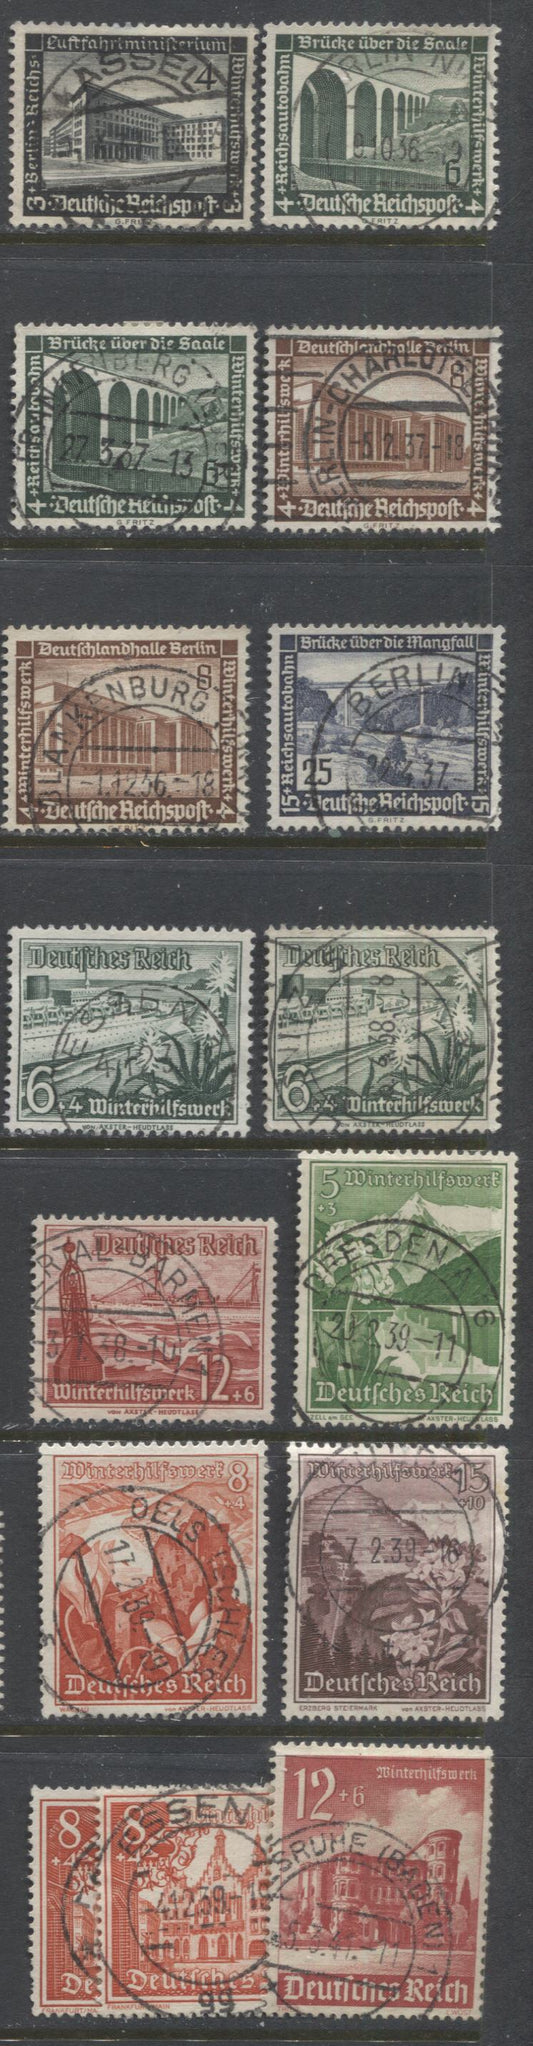 Lot 457 Germany SC#B94/B182 1936-1940 Semi-Postal Issues, All With SON Town Cancels, 15 VF Used Singles, Click on Listing to See ALL Pictures, 2022 Scott Classic Cat. $18.55